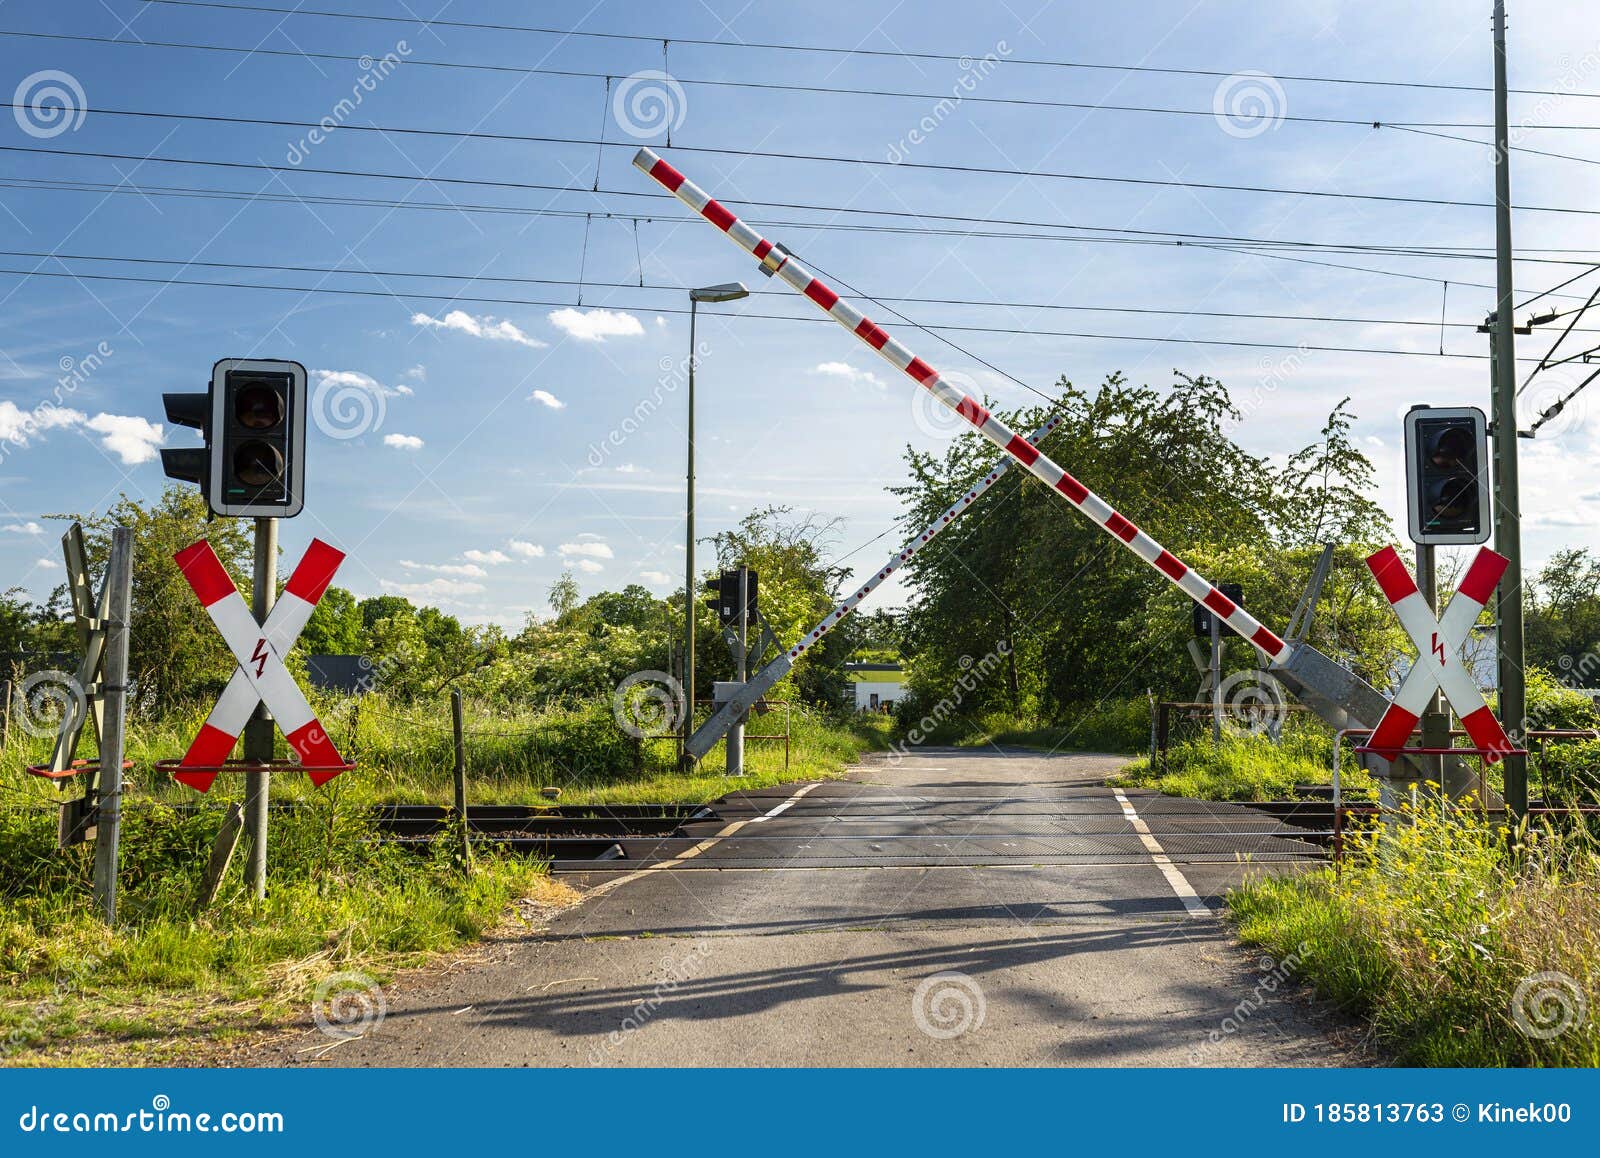 Guarded Railroad Crossing With Closing Barriers Red Warning Light And Cross Of Saint Andrew Stock Image Image Of Gate Gateway